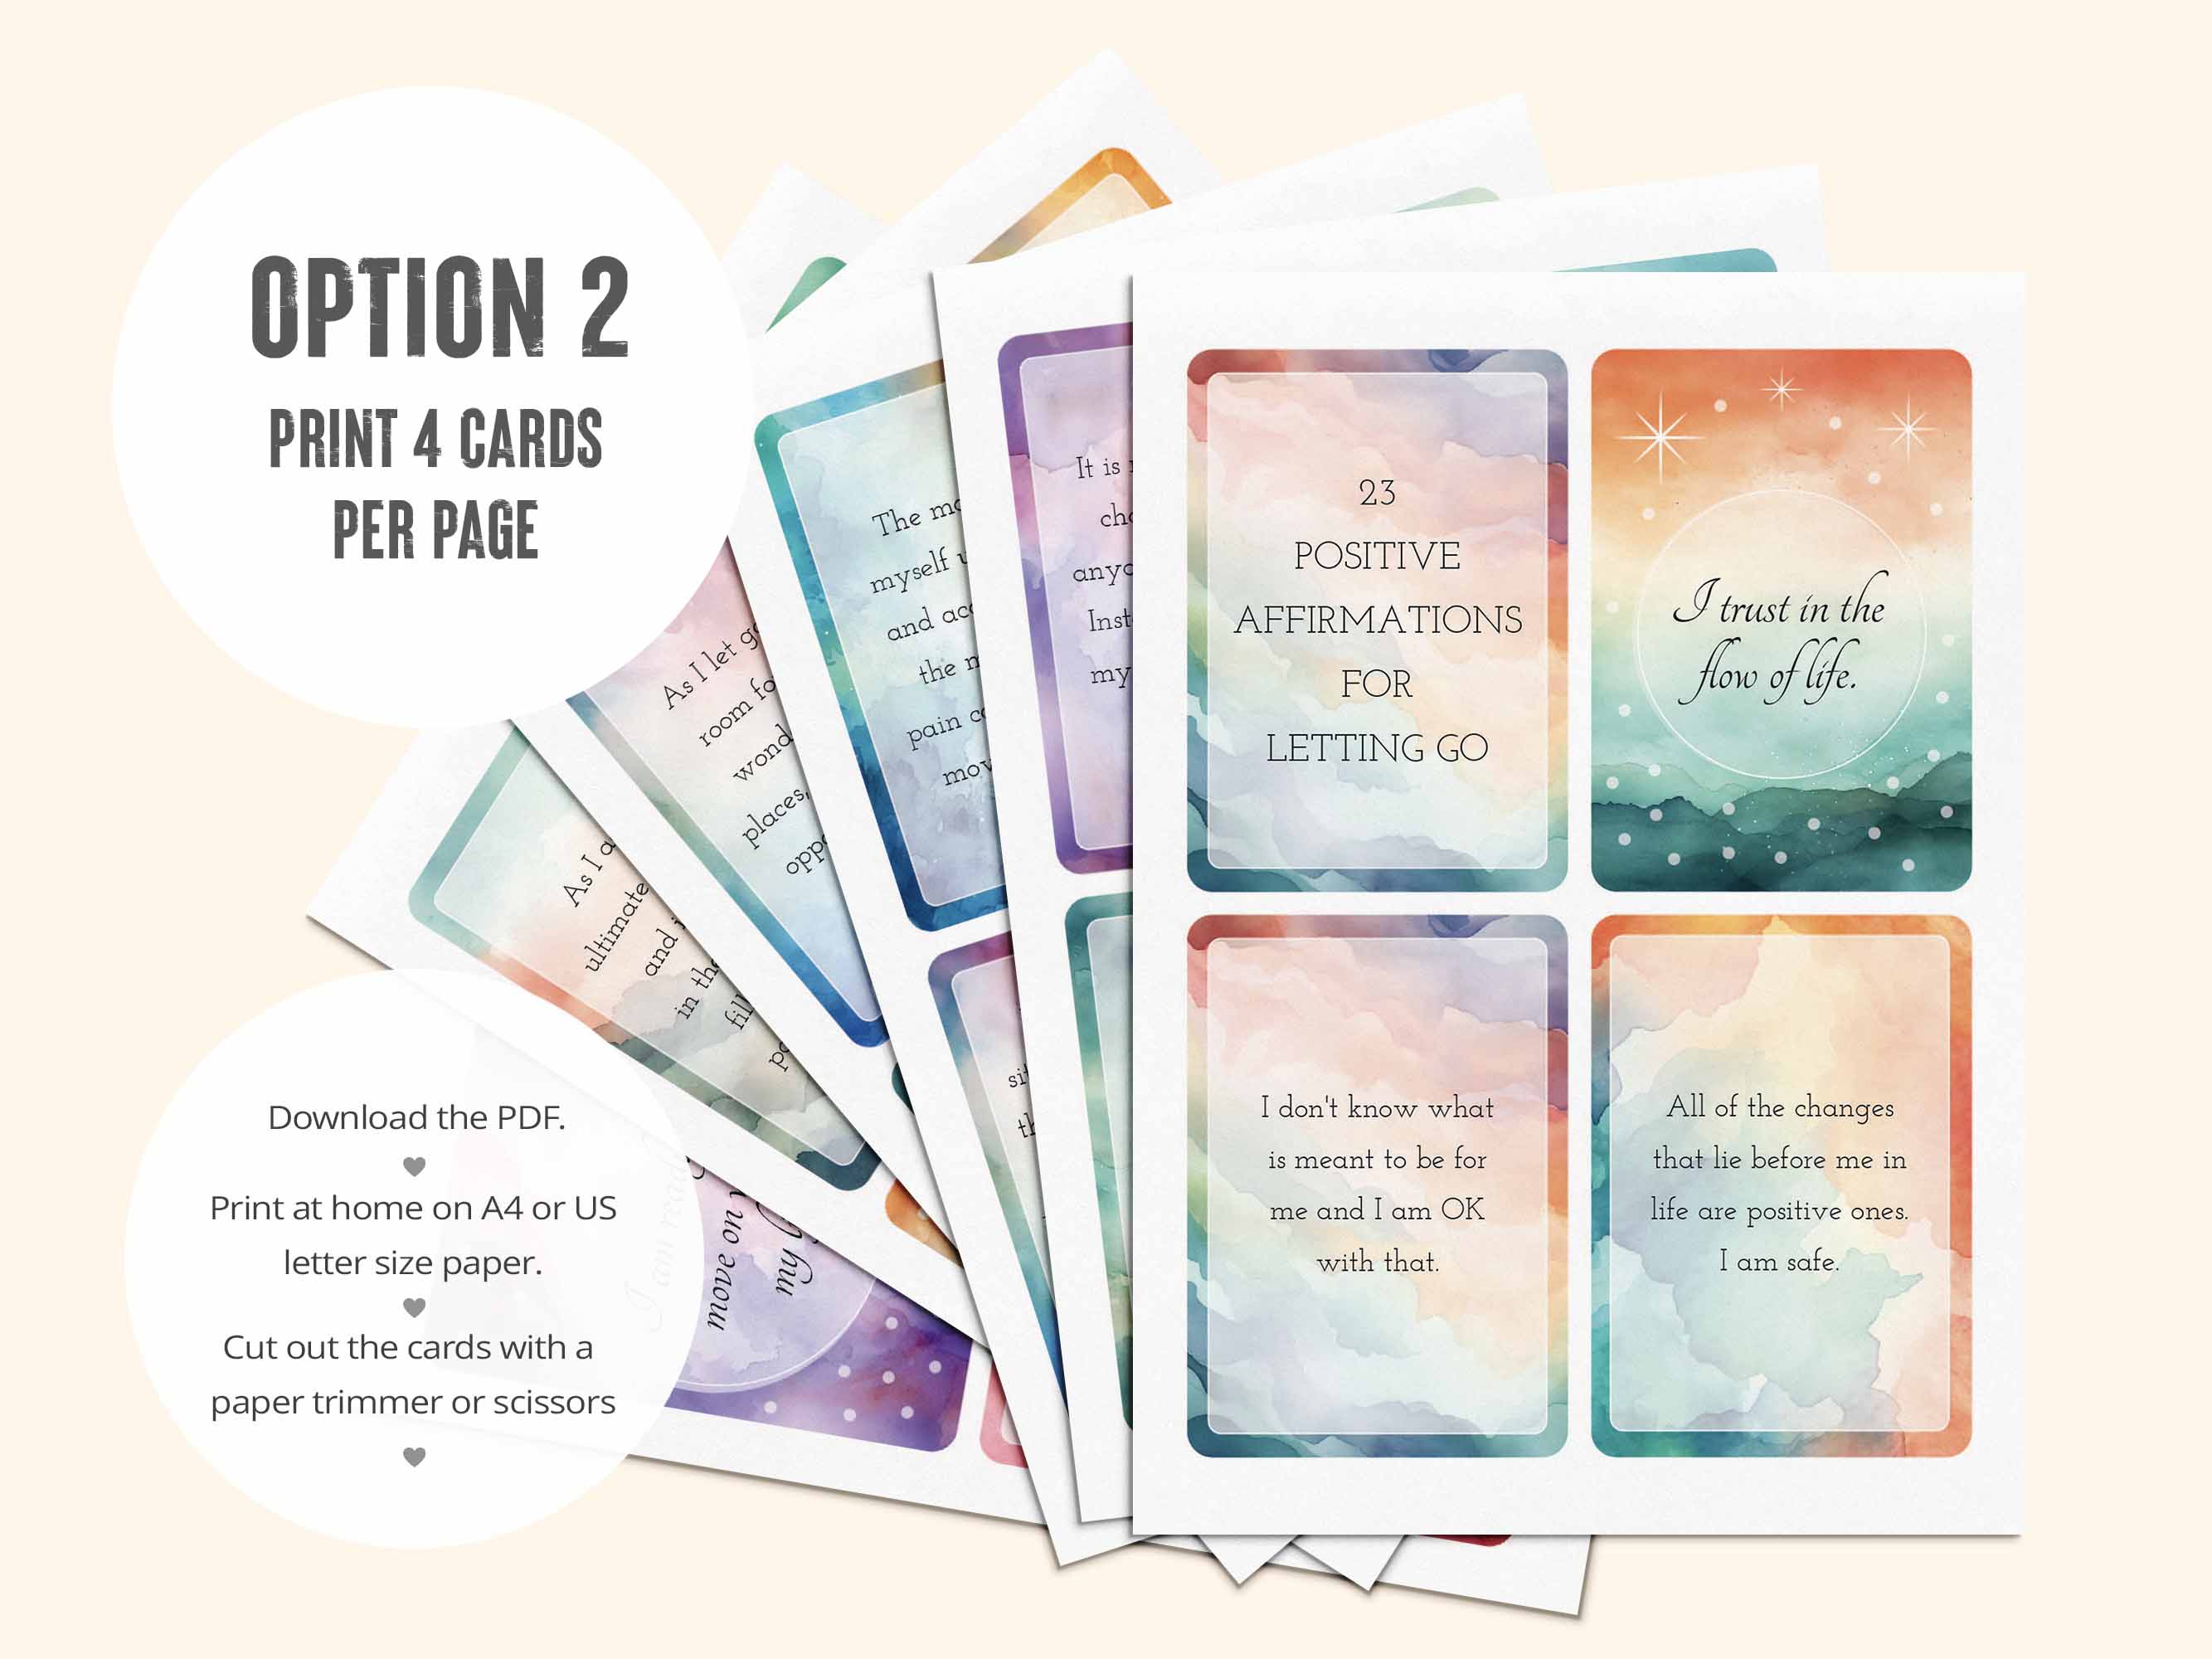 The second PDF has all 23 letting go affirmations laid out 4 per page.